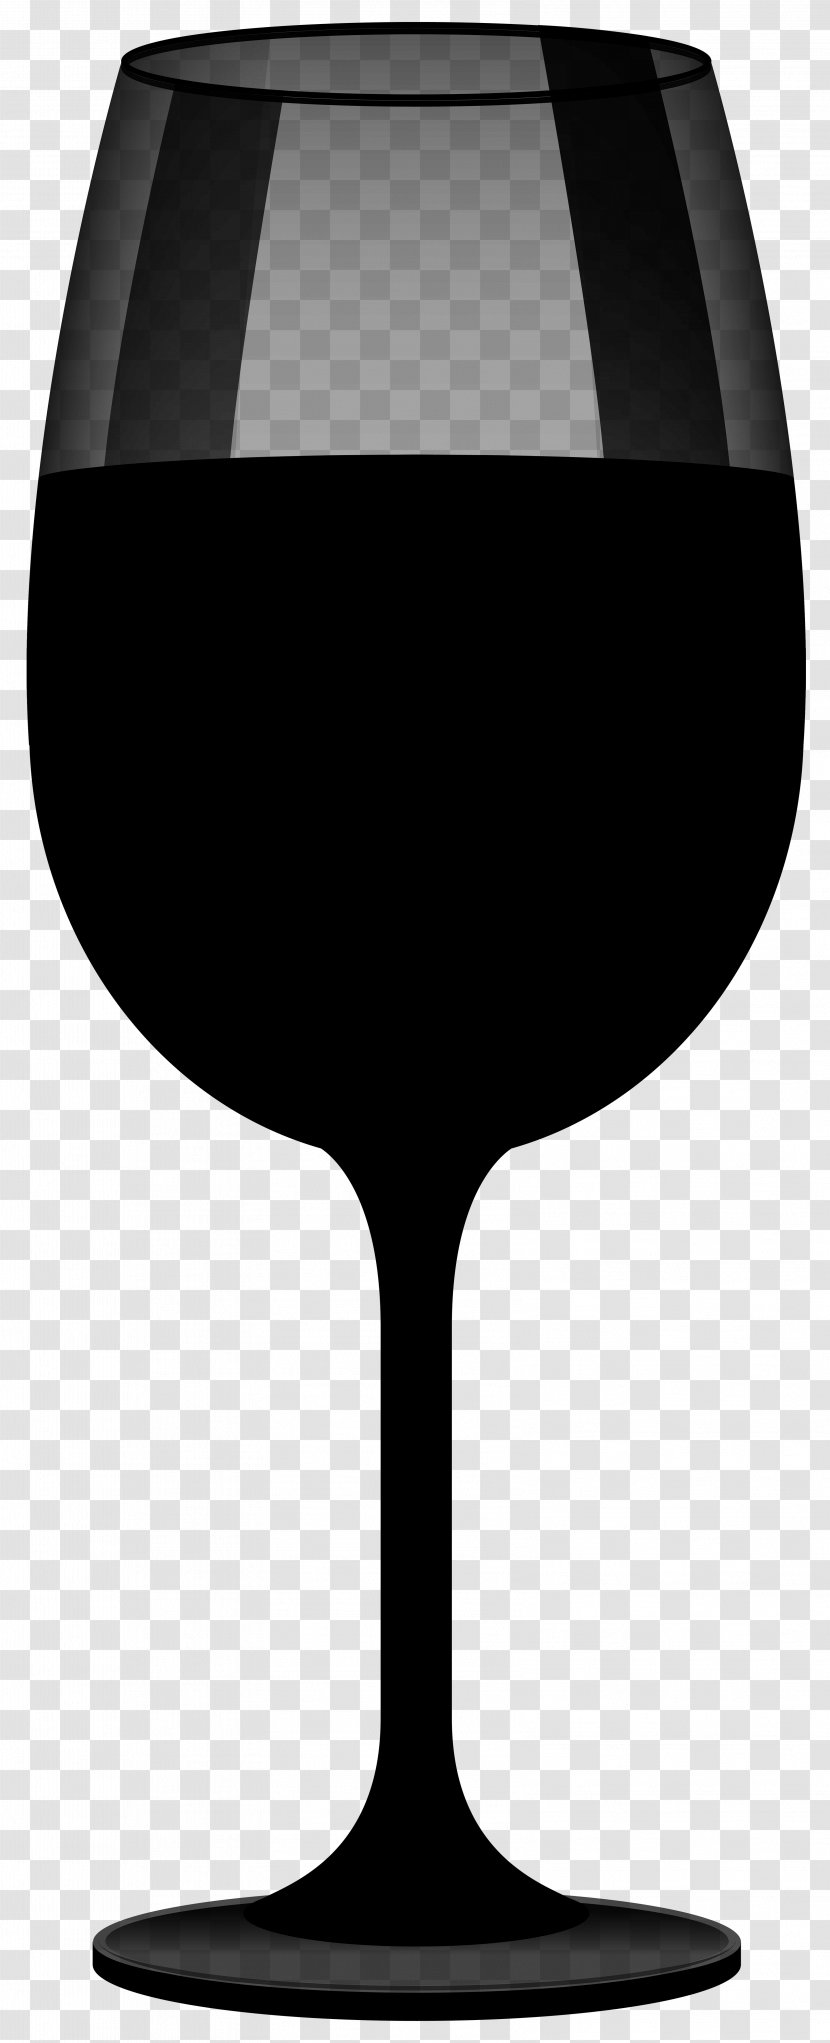 Wine Glass Champagne Product Design - Ping Pong - Stemware Transparent PNG